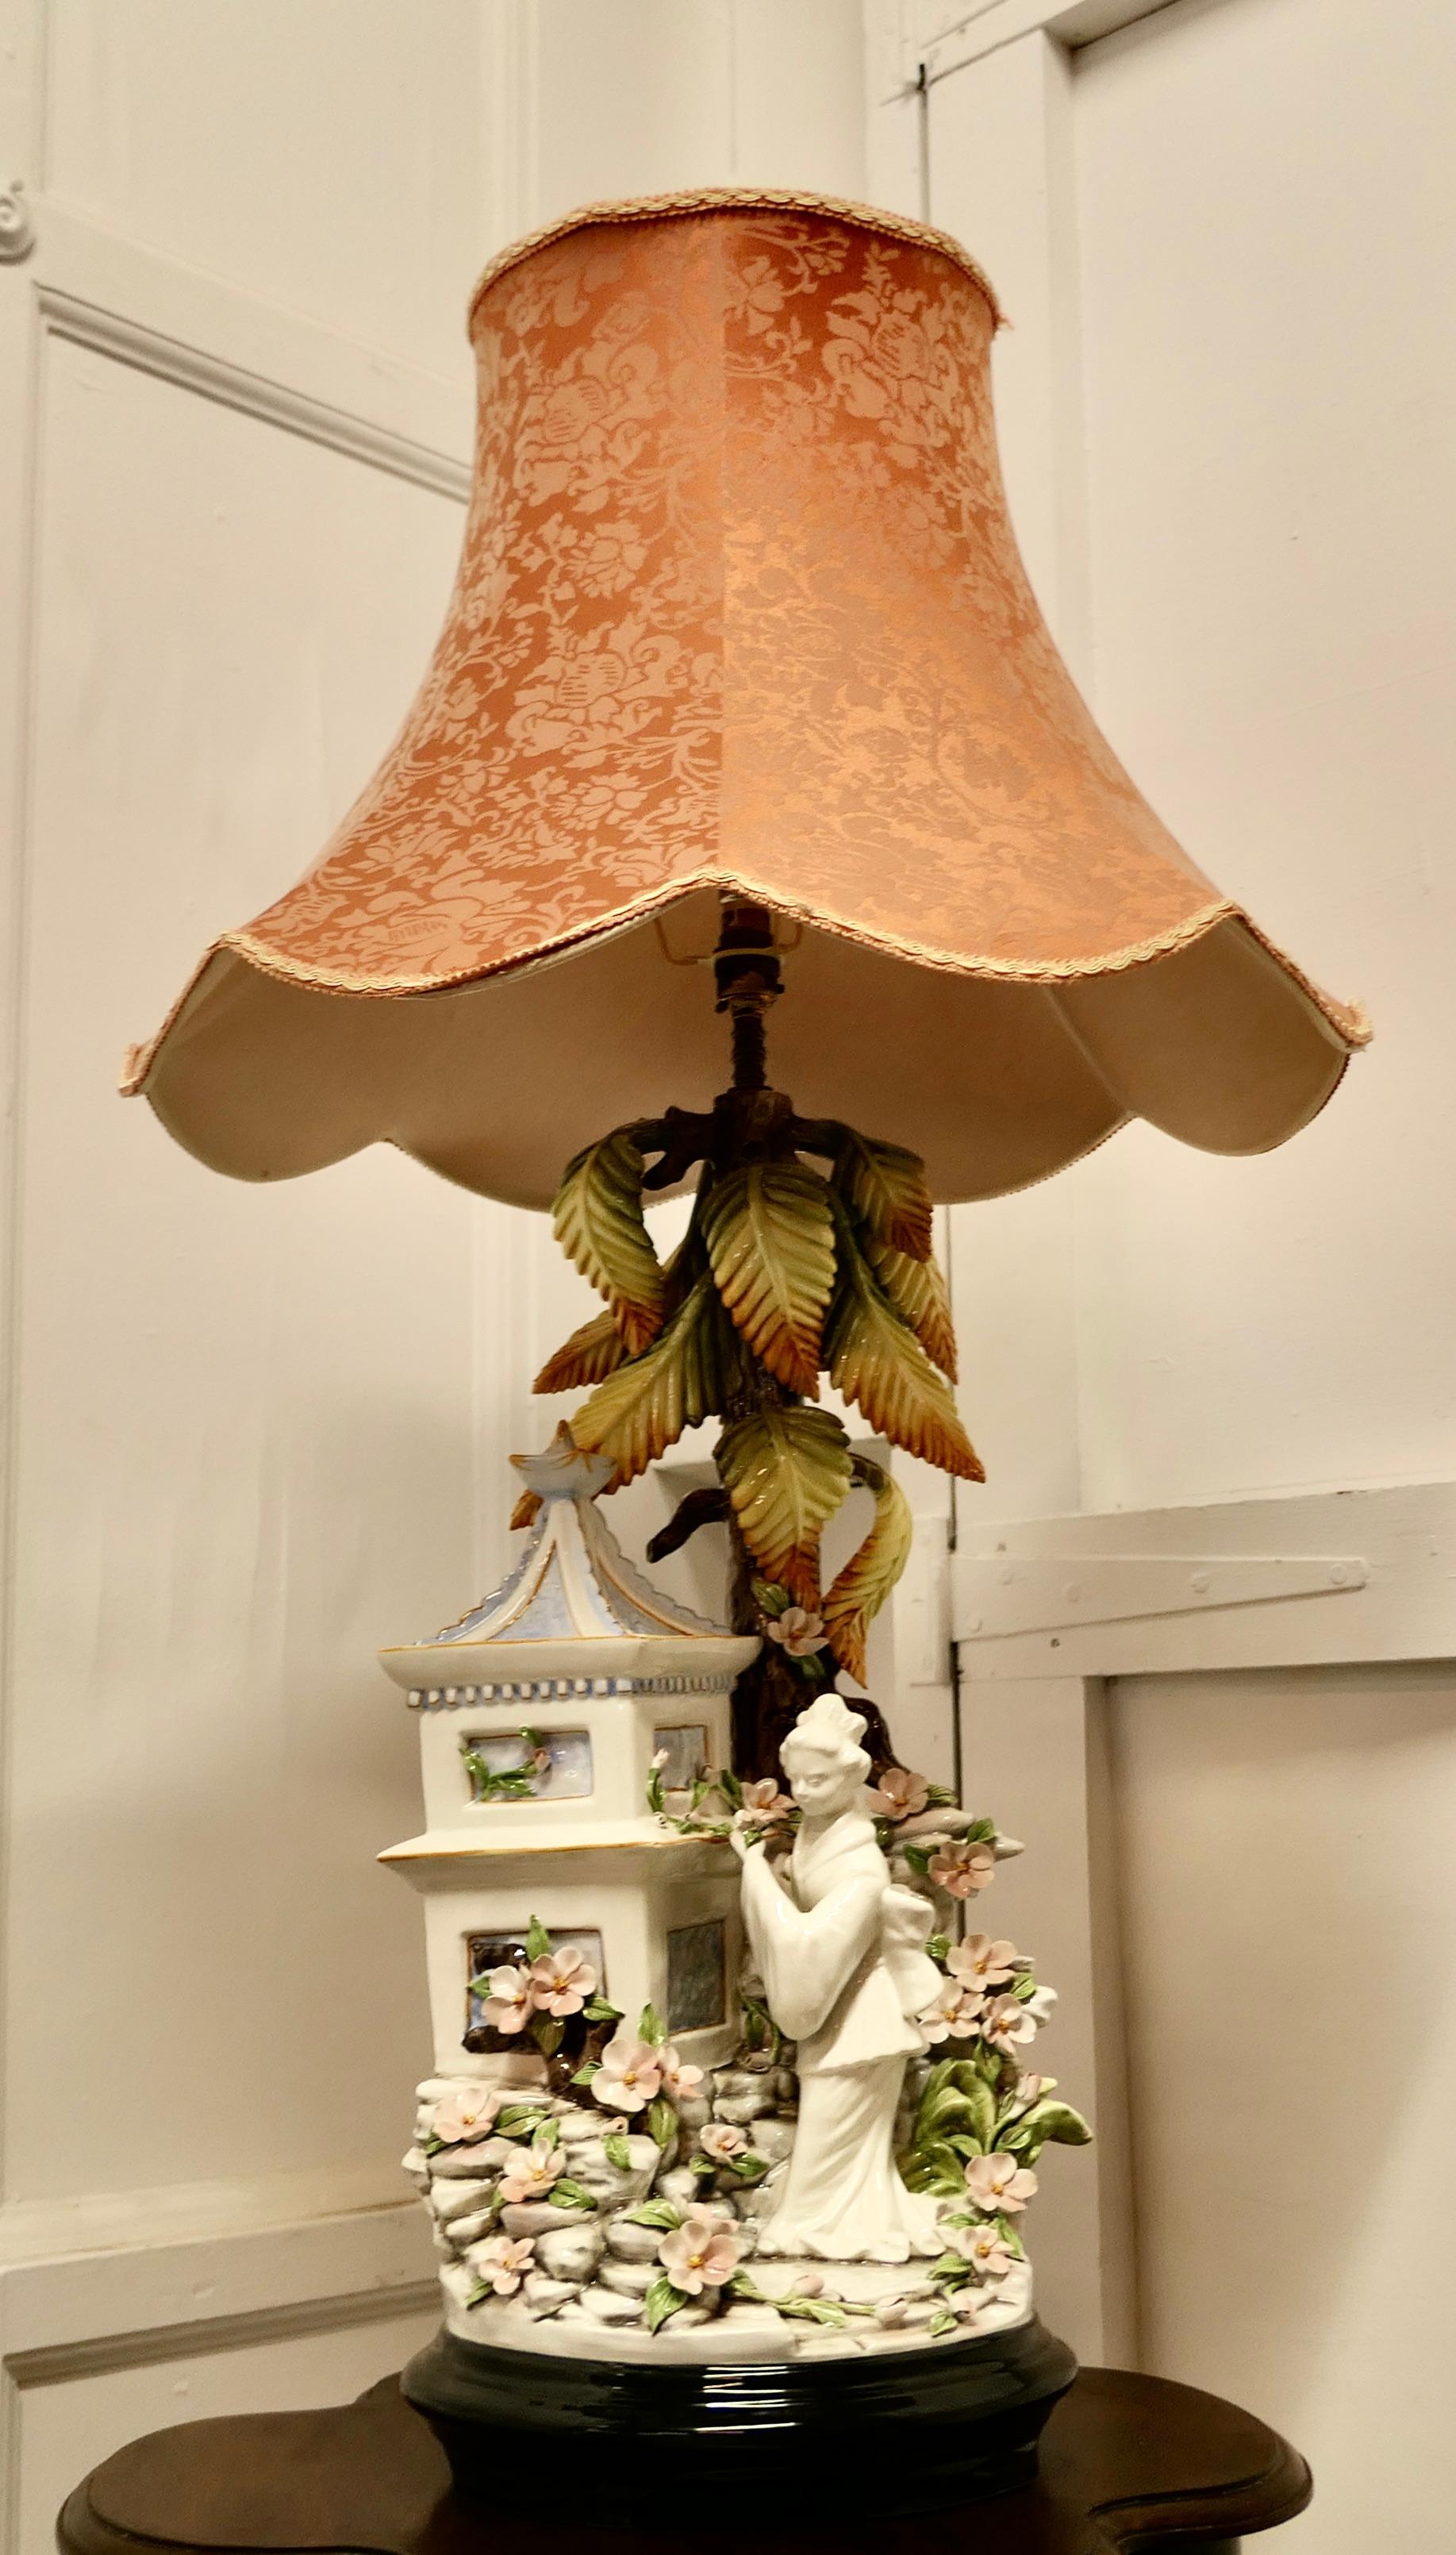 Large figural ceramic table lamp by D. Polo Uiato, Capodimonte style

This is a large and rare piece lamp, the lamp is a colourful outdoor scene with a Geisha in her flower garden under a tree next to a pagoda, the lamp comes with its original